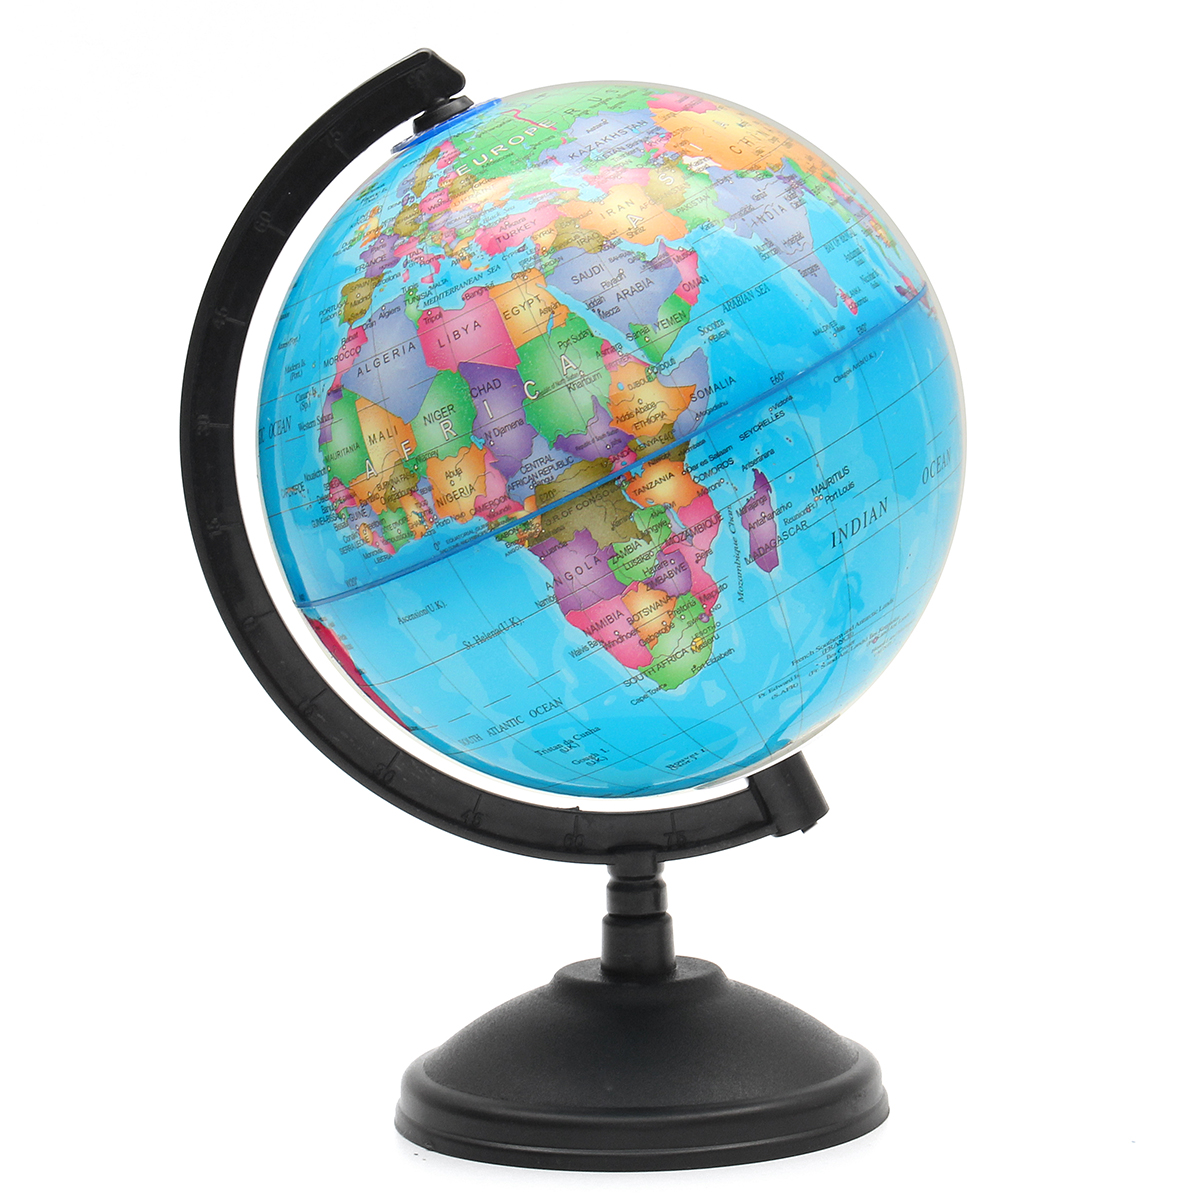 World-Earth-Globe-Atlas-Map-Geography-Education-Gift-w-Rotating-Stand-LED-light-1256065-4